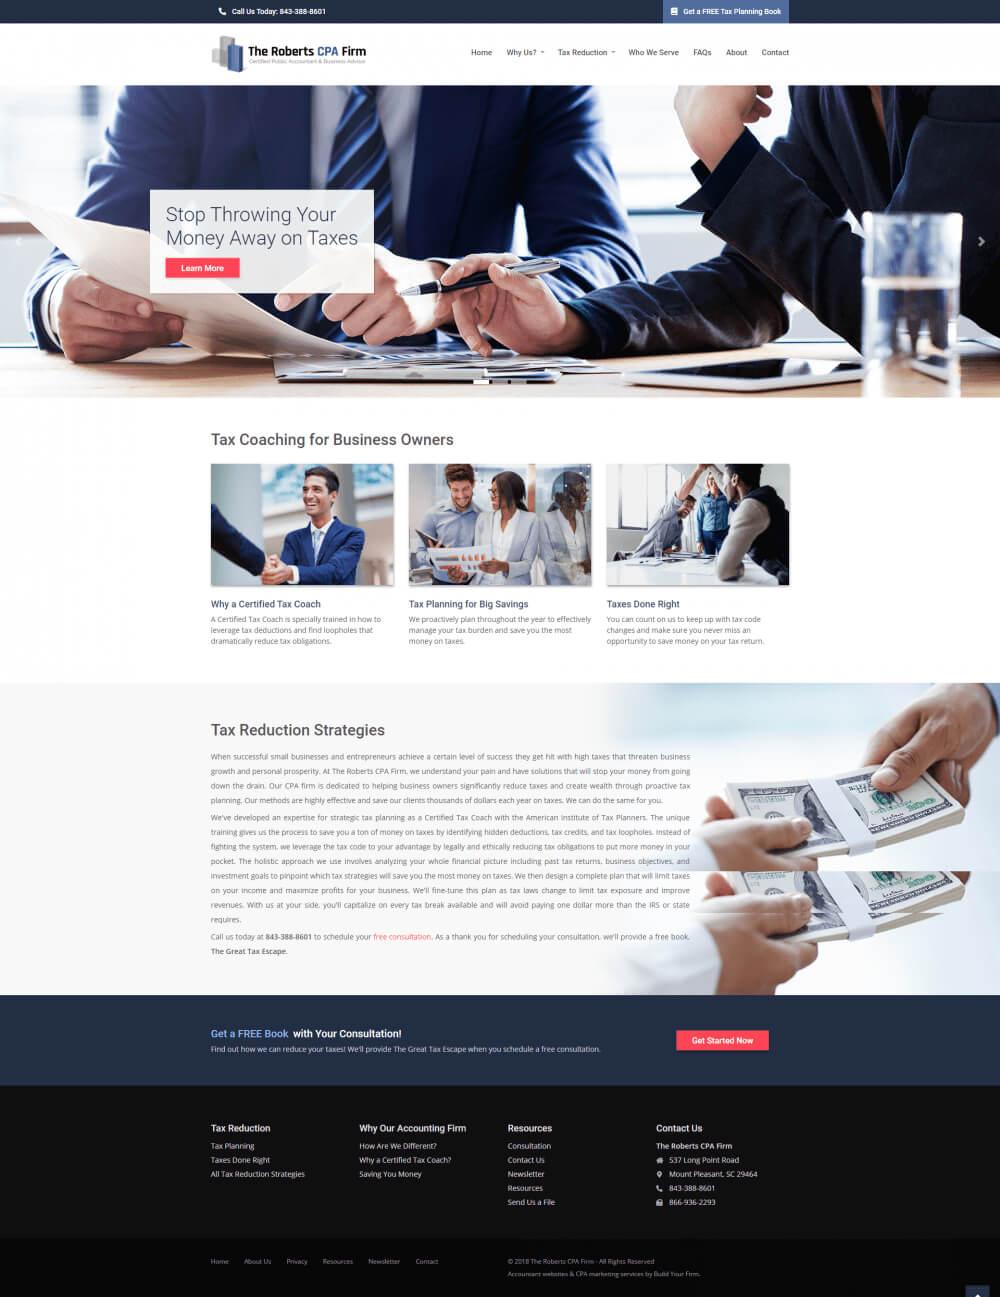 Website of The Roberts CPA Firm